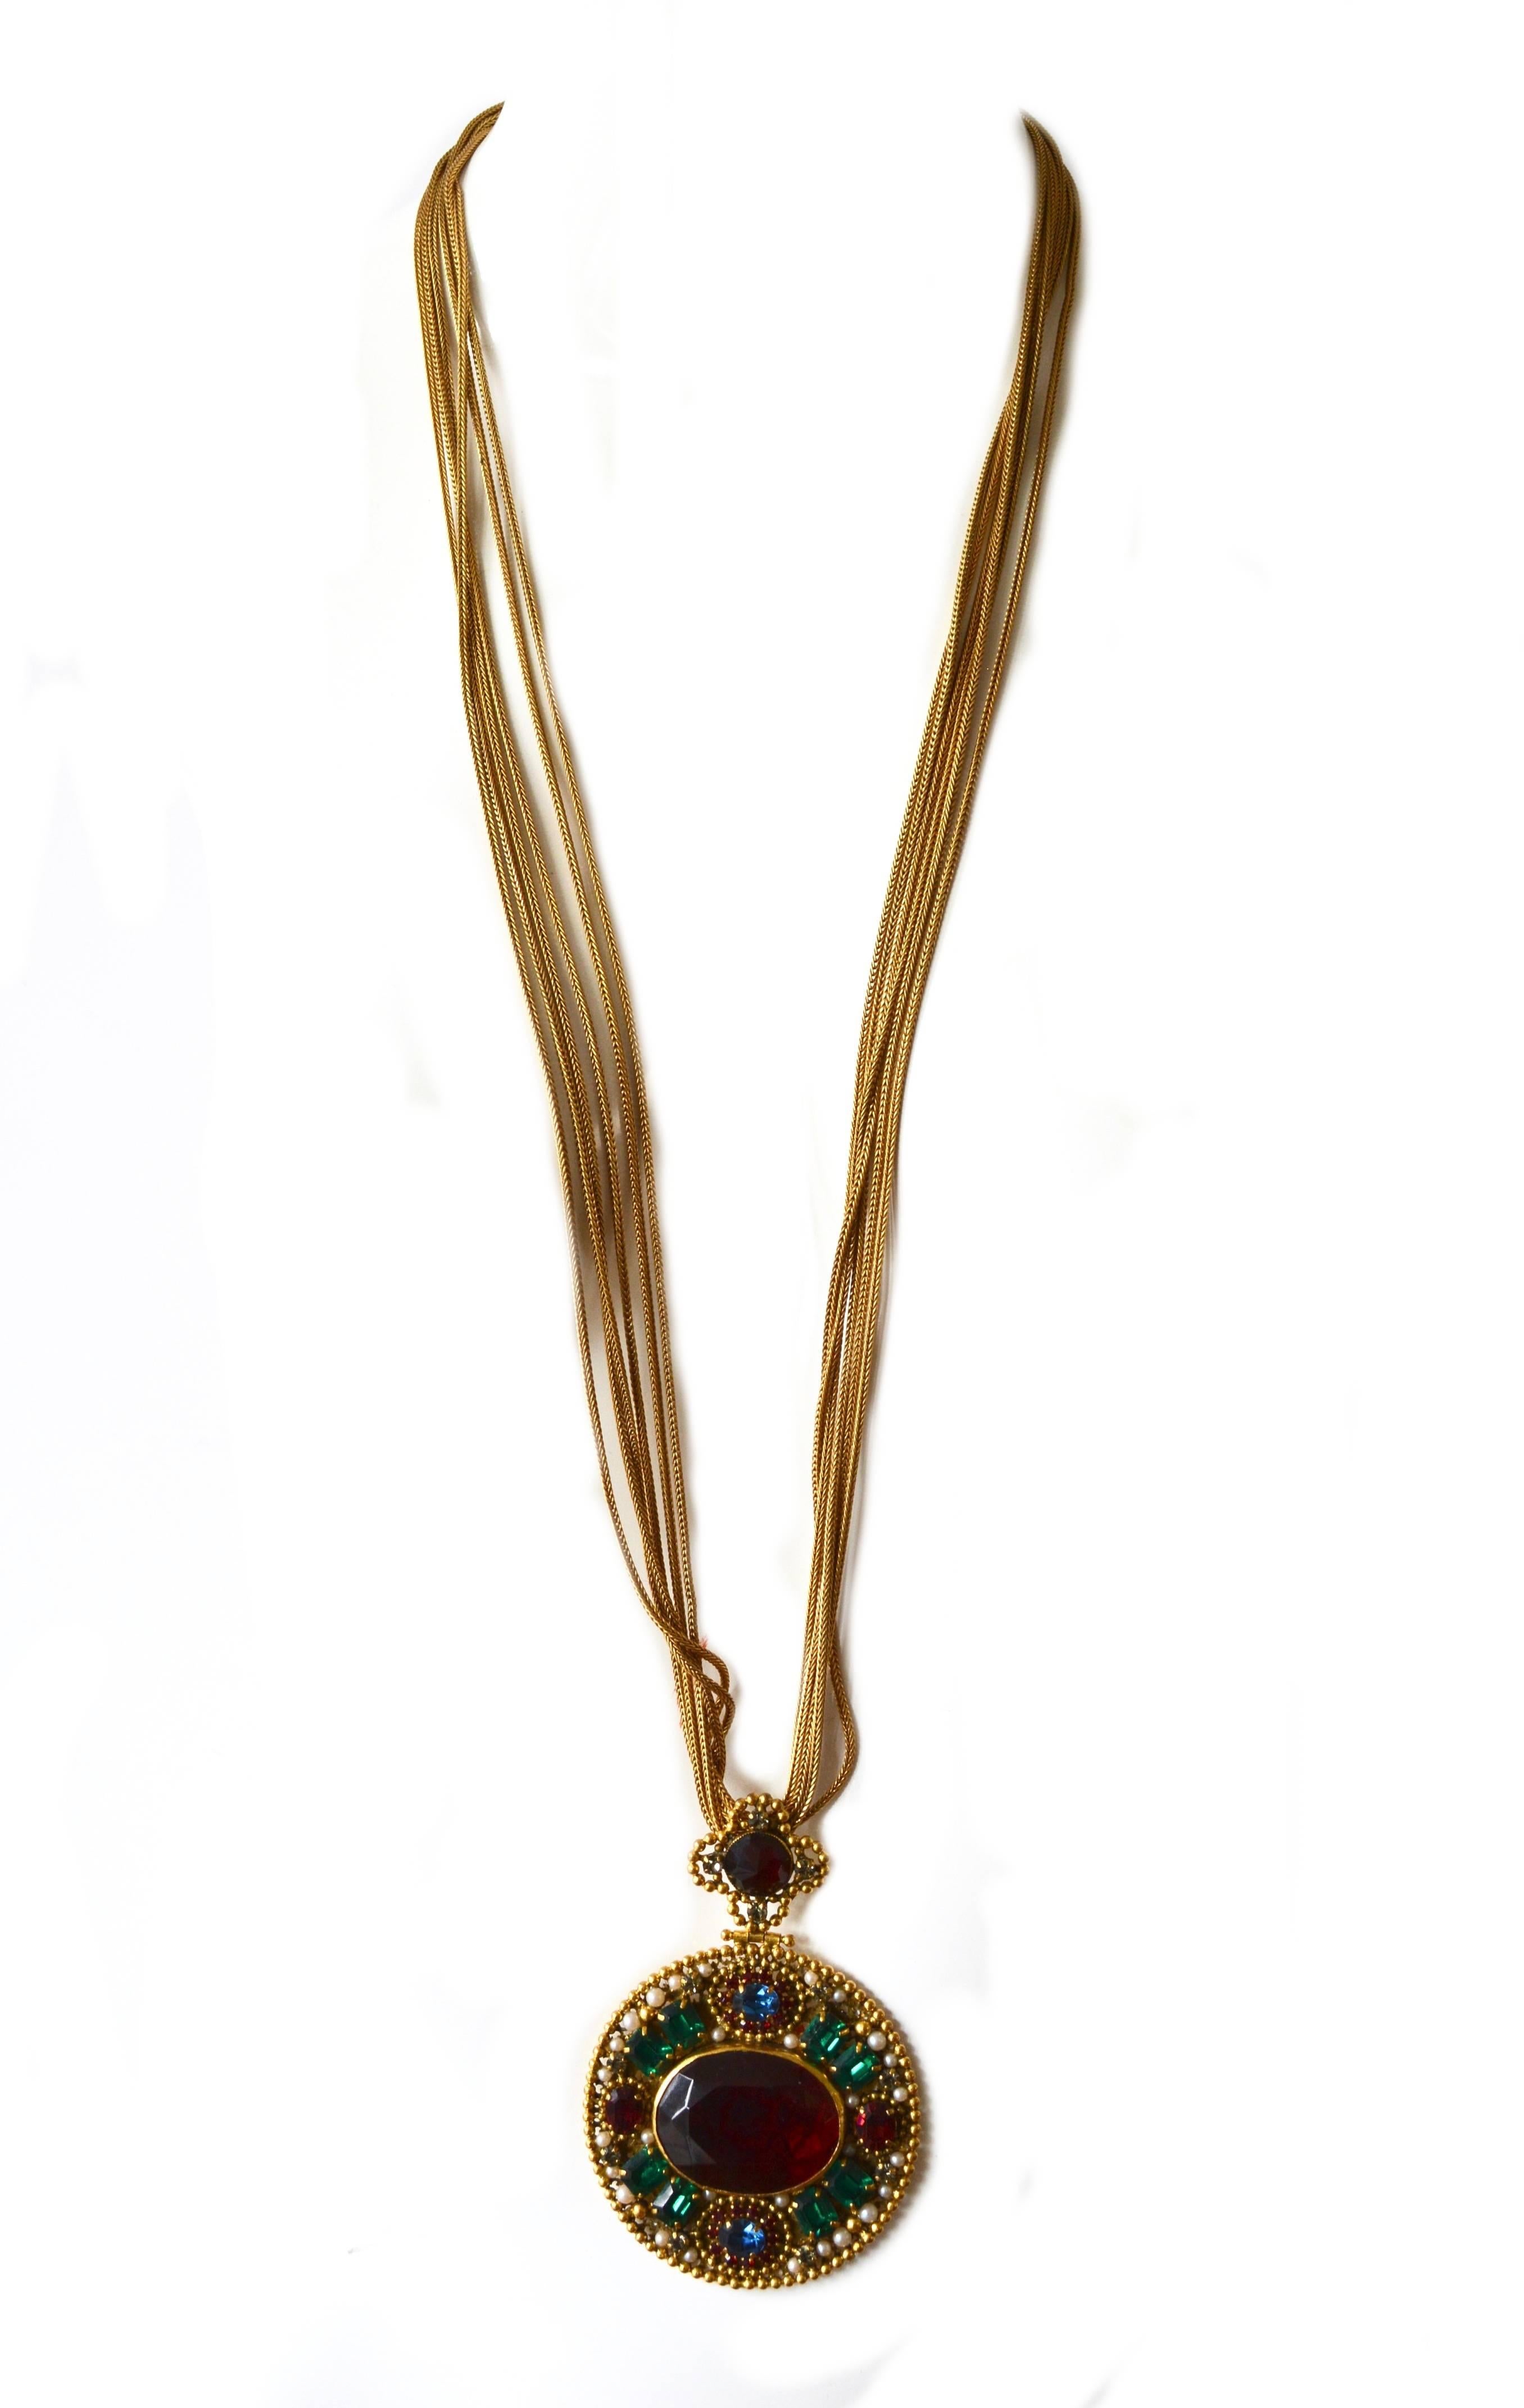 This very special rare piece comes from the private collection of a former employee of YSL.  A similar necklace was sold in the Anna Miller auction, this collection also featured that piece as well. Here, this version features glass stones and gilt